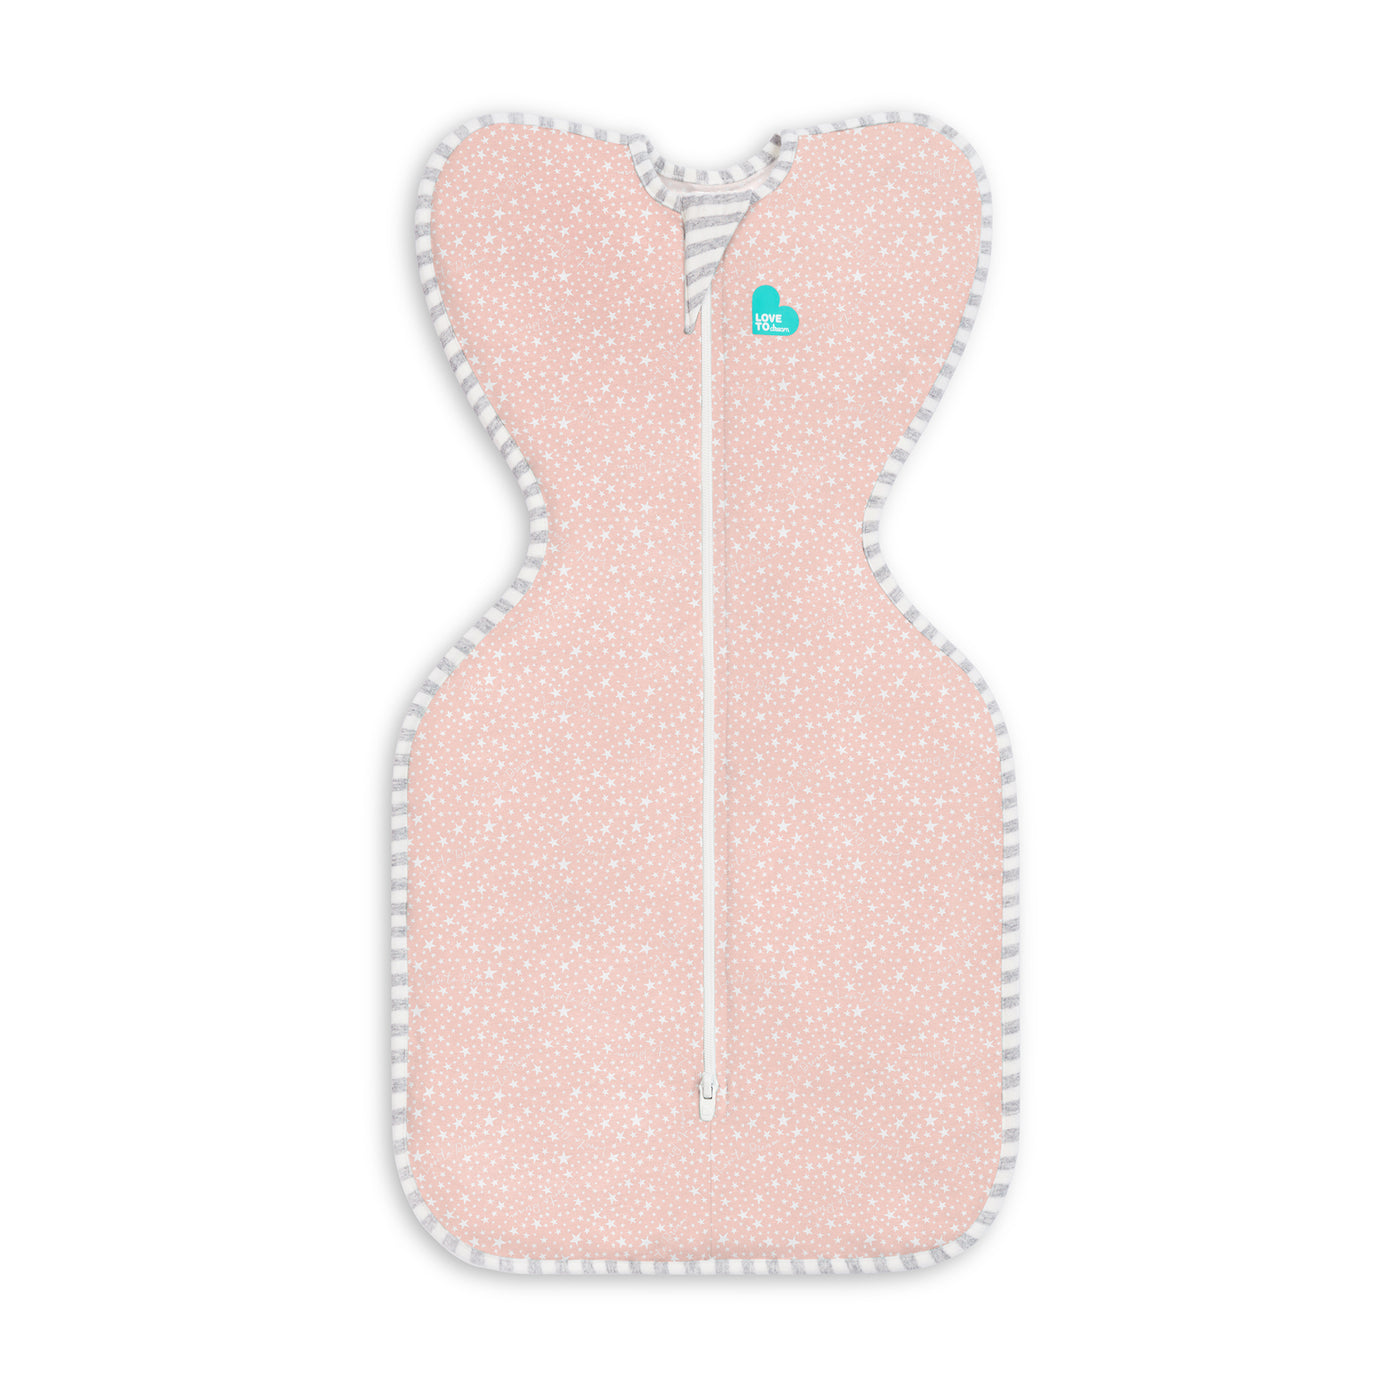 Swaddle Up™ Designer 1.0 TOG - Stardust Dusty Pink - Love to Dream™ NZ 